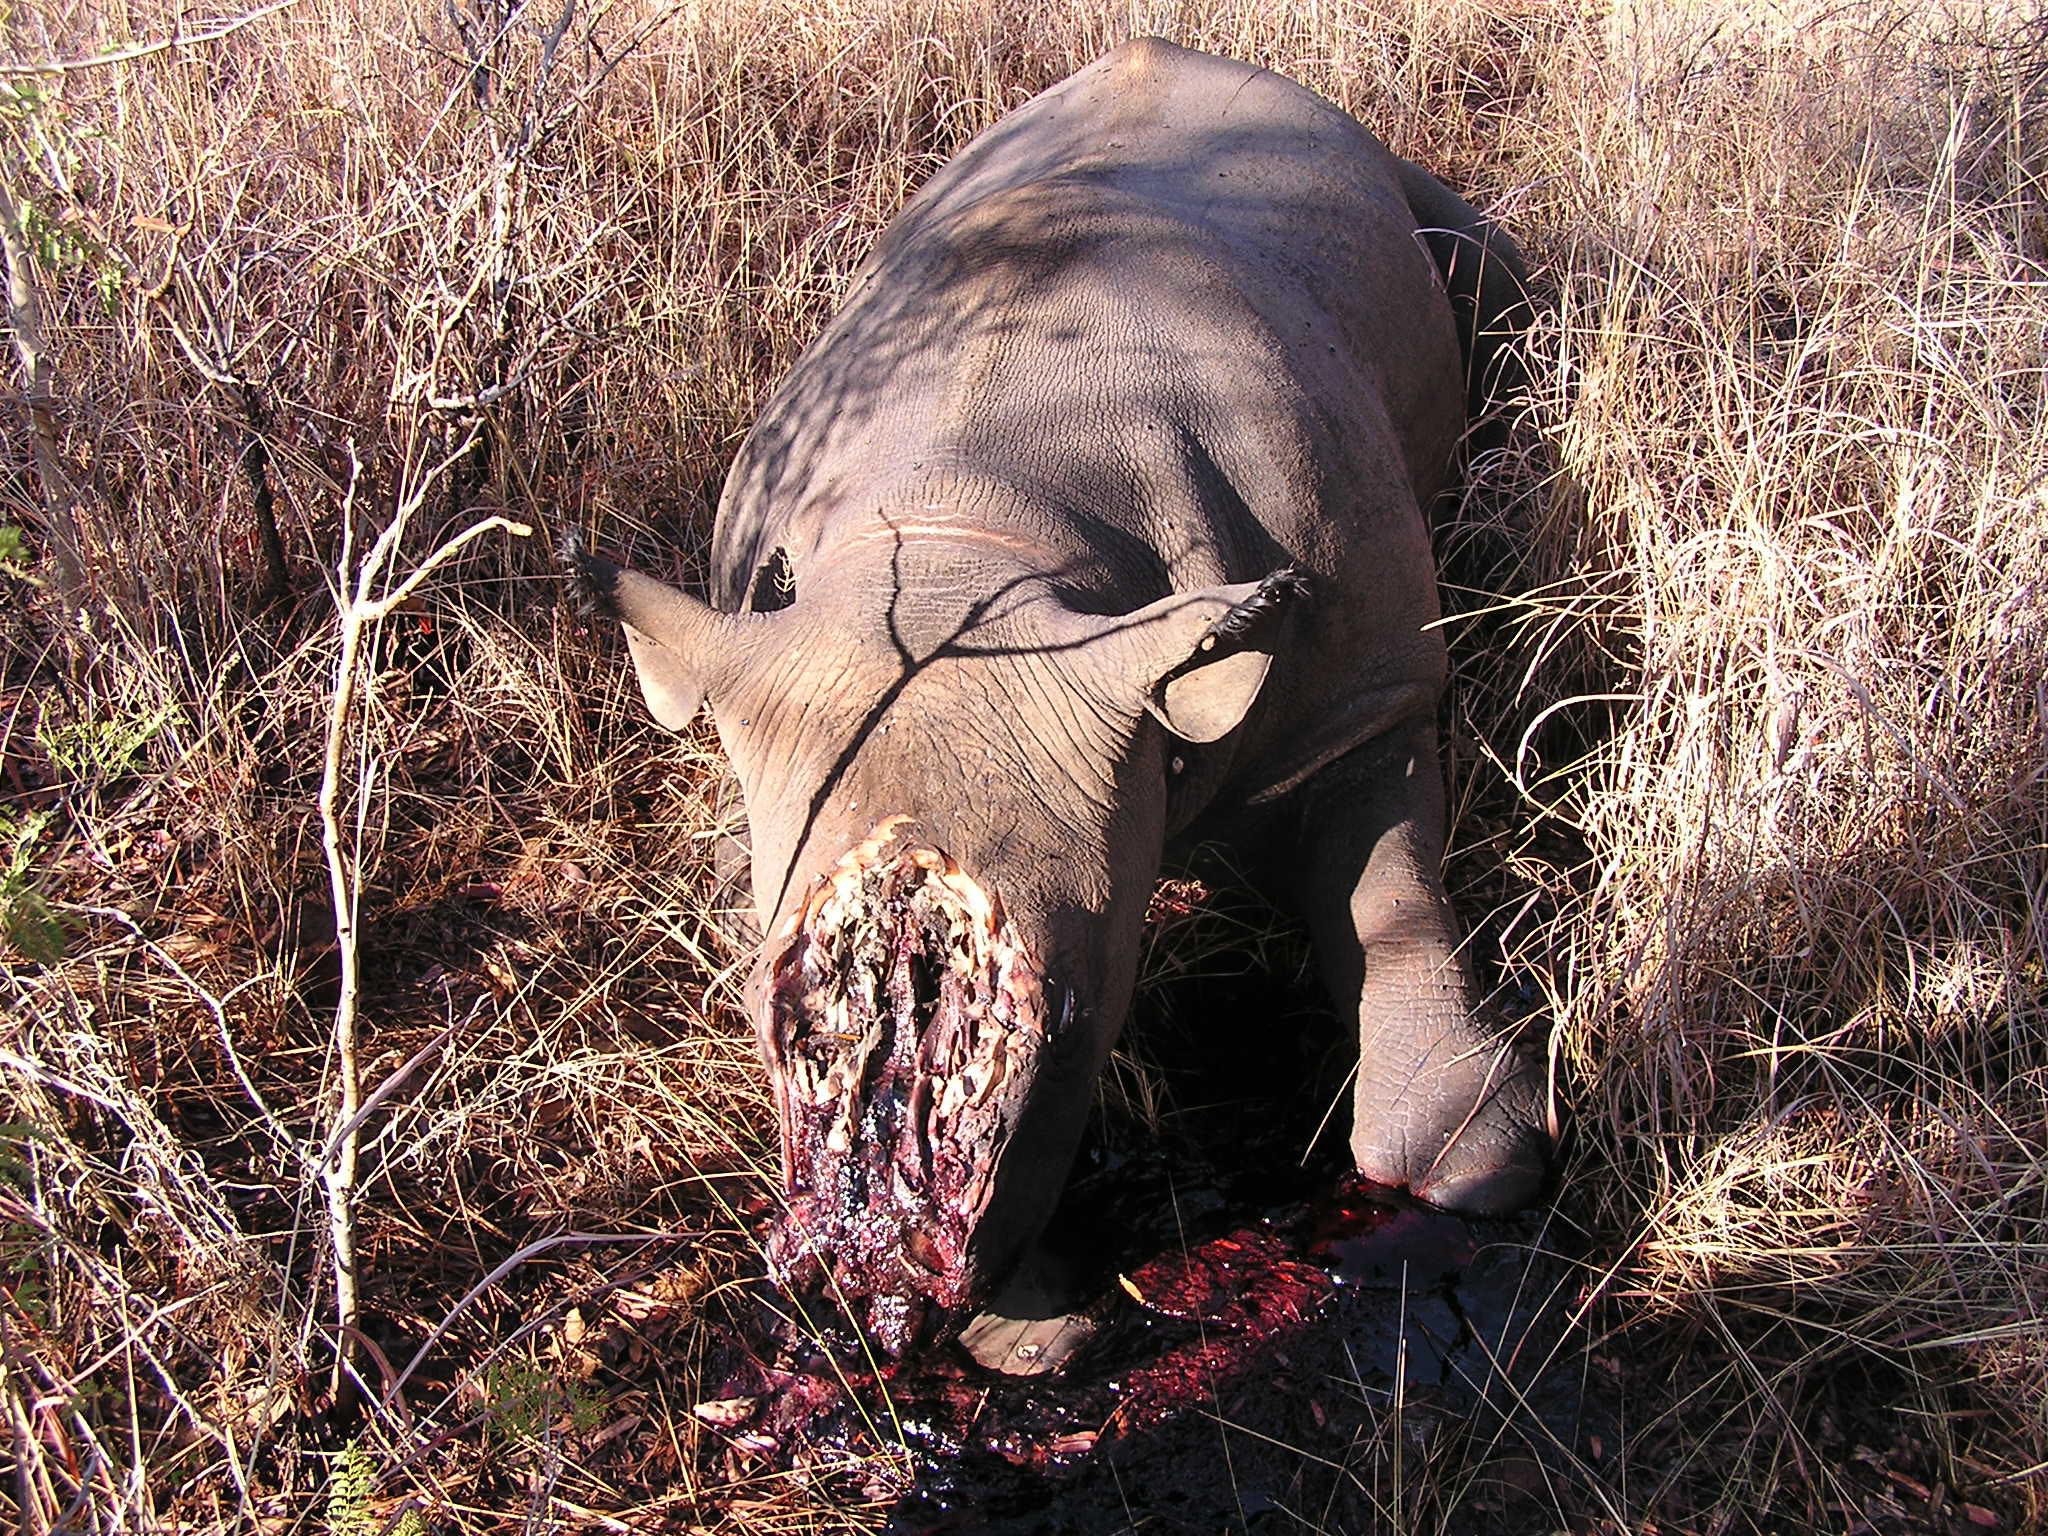 A poached rhino. Rhino horns are said to increase sexual performance. Scientifically proven false